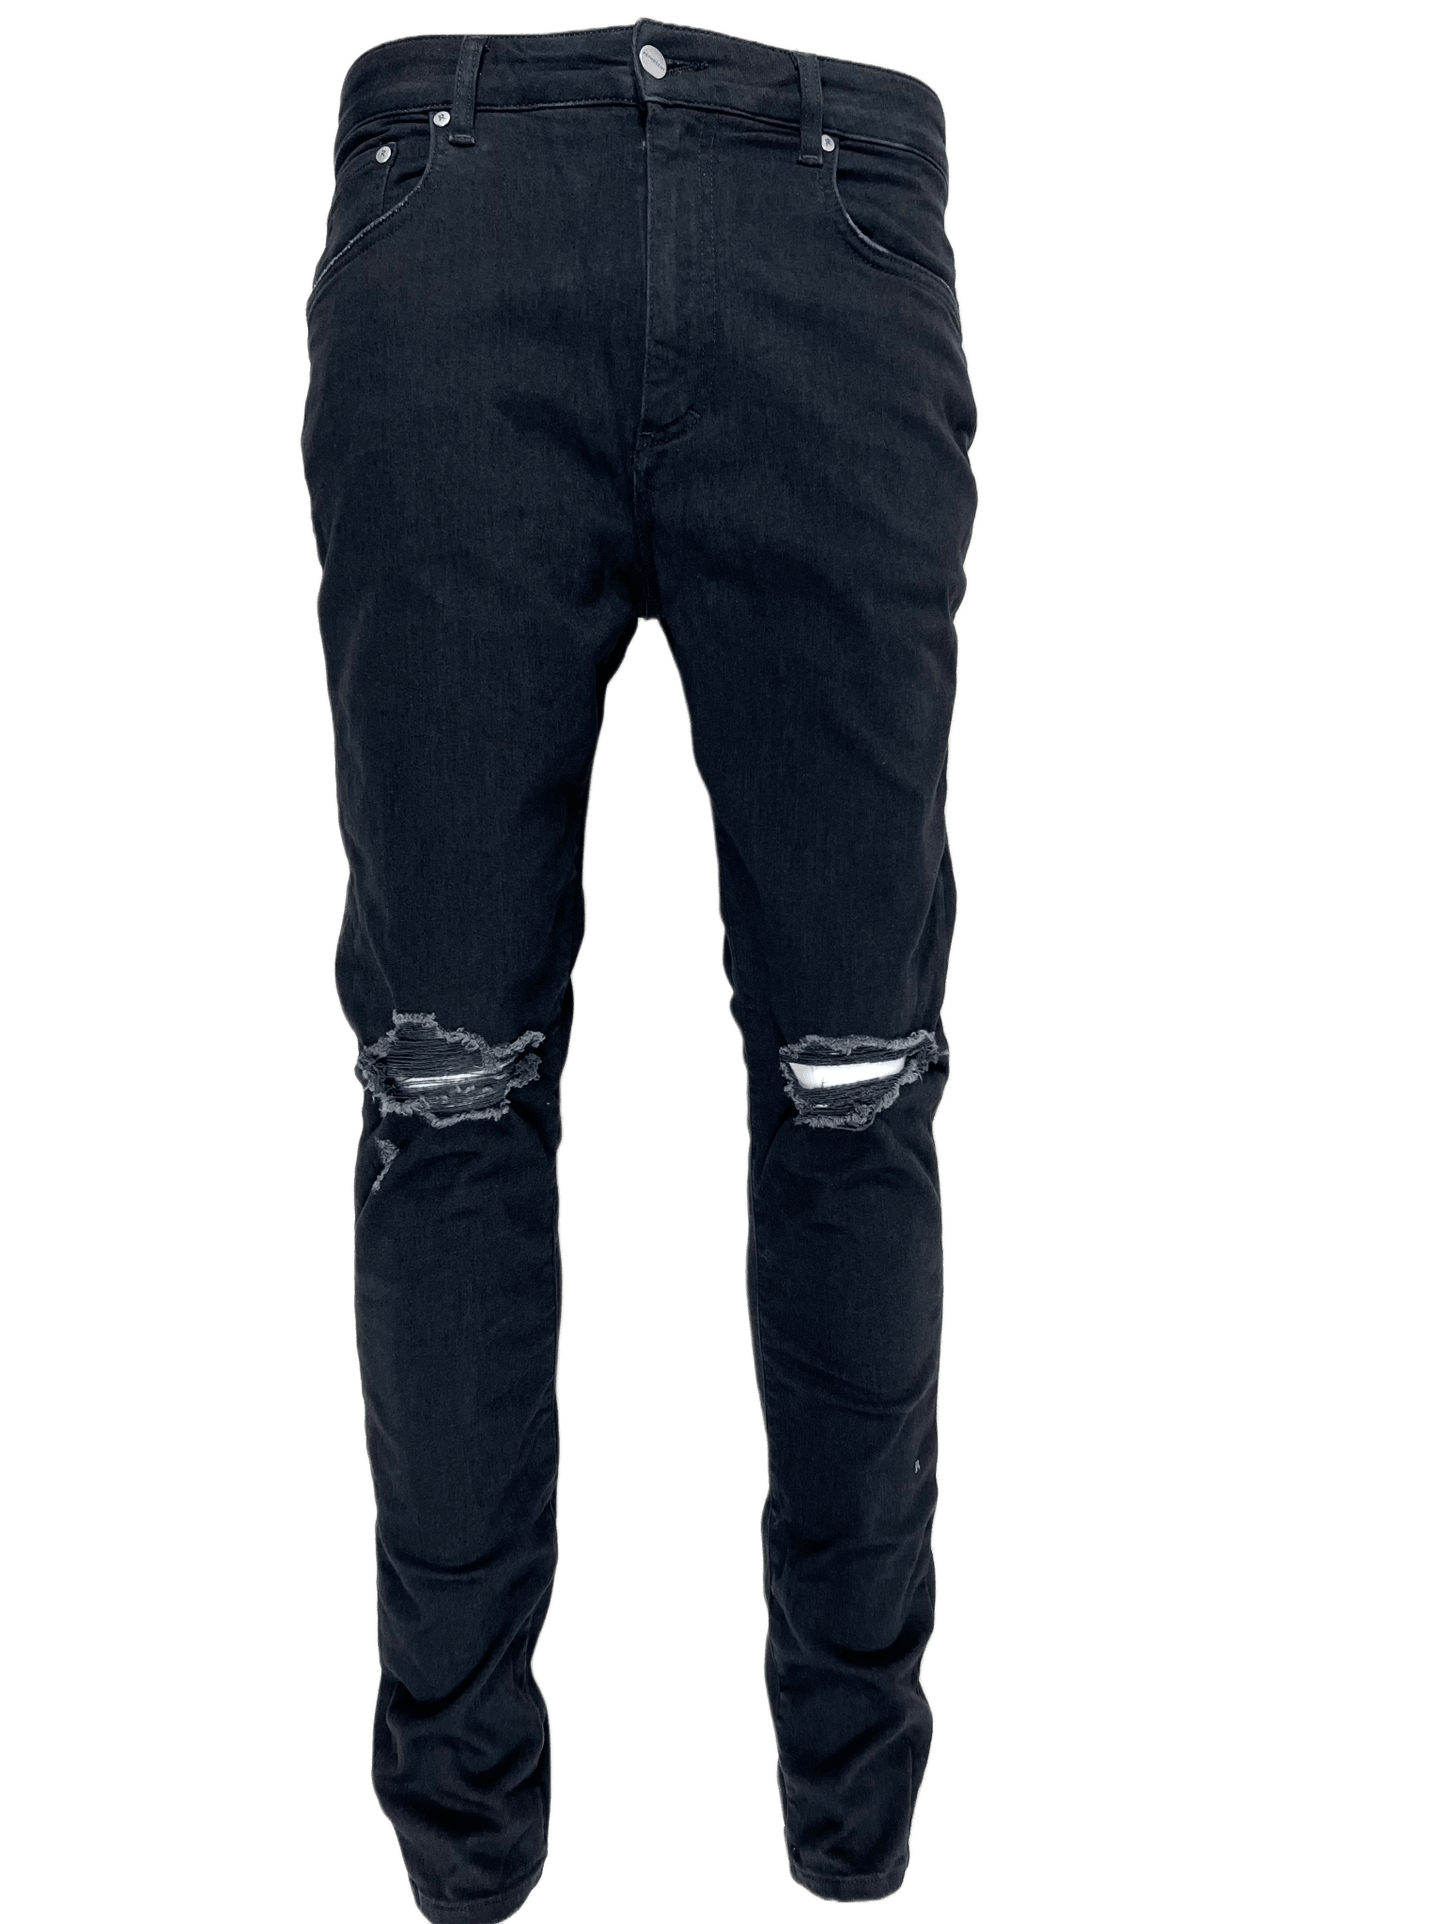 A pair of black REPRESENT M07044 DESTROYER DENIM BLACK jeans with holes on the knees, reflecting a distressed style.